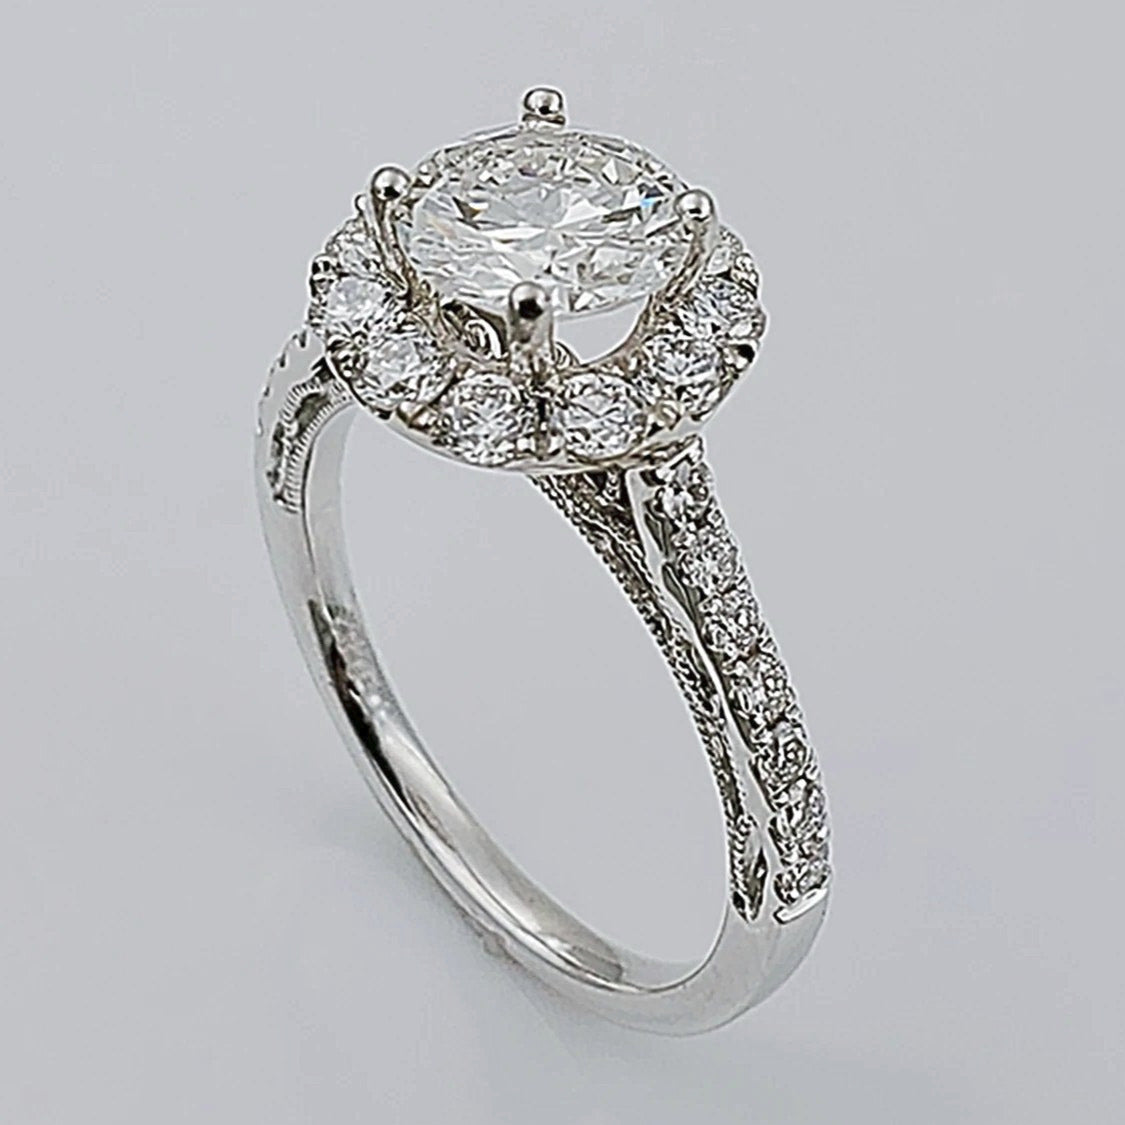 Women's 14K White Gold with 1.22 CT Round Center Diamond (VS2 Color G) 3.3 GR Total Weight Wedding Ring. (Size: 6.25)